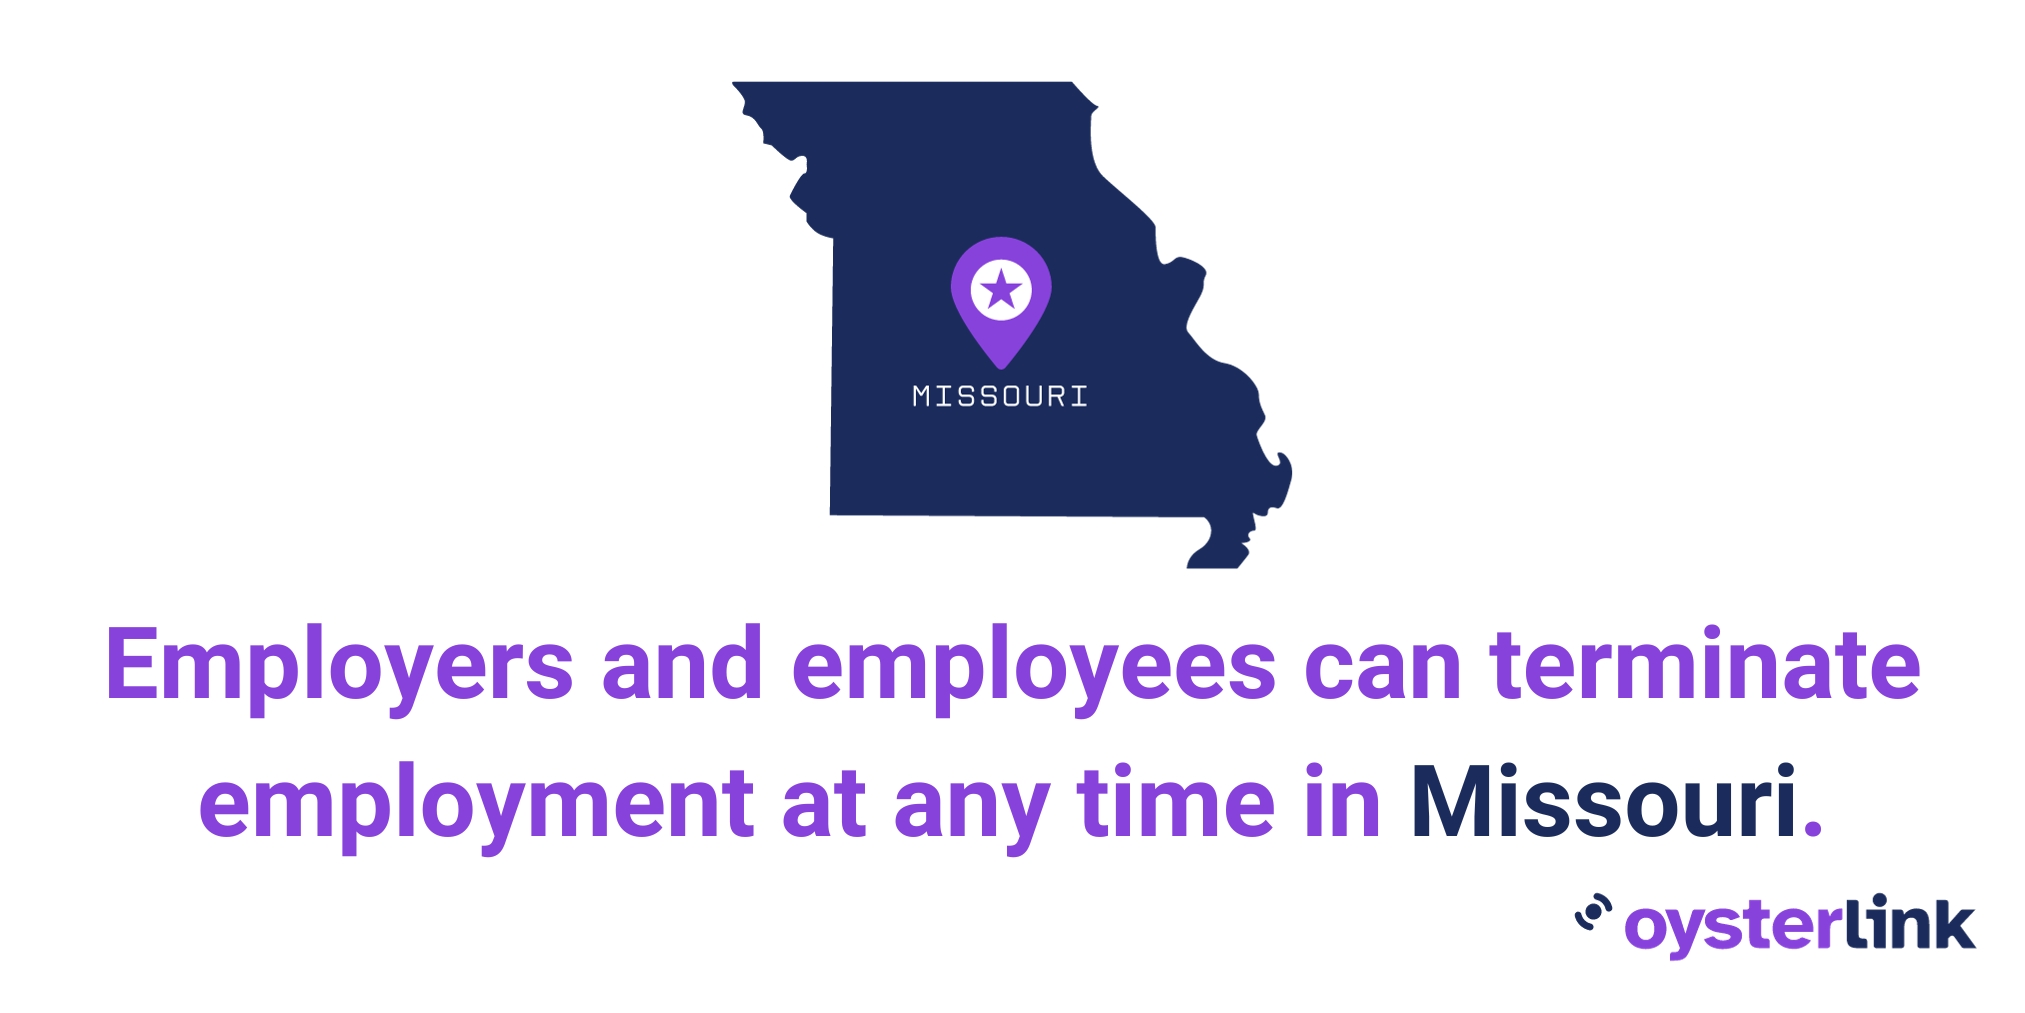 Missouri observes at at-will statute where employers and employees can terminate employment at any time.